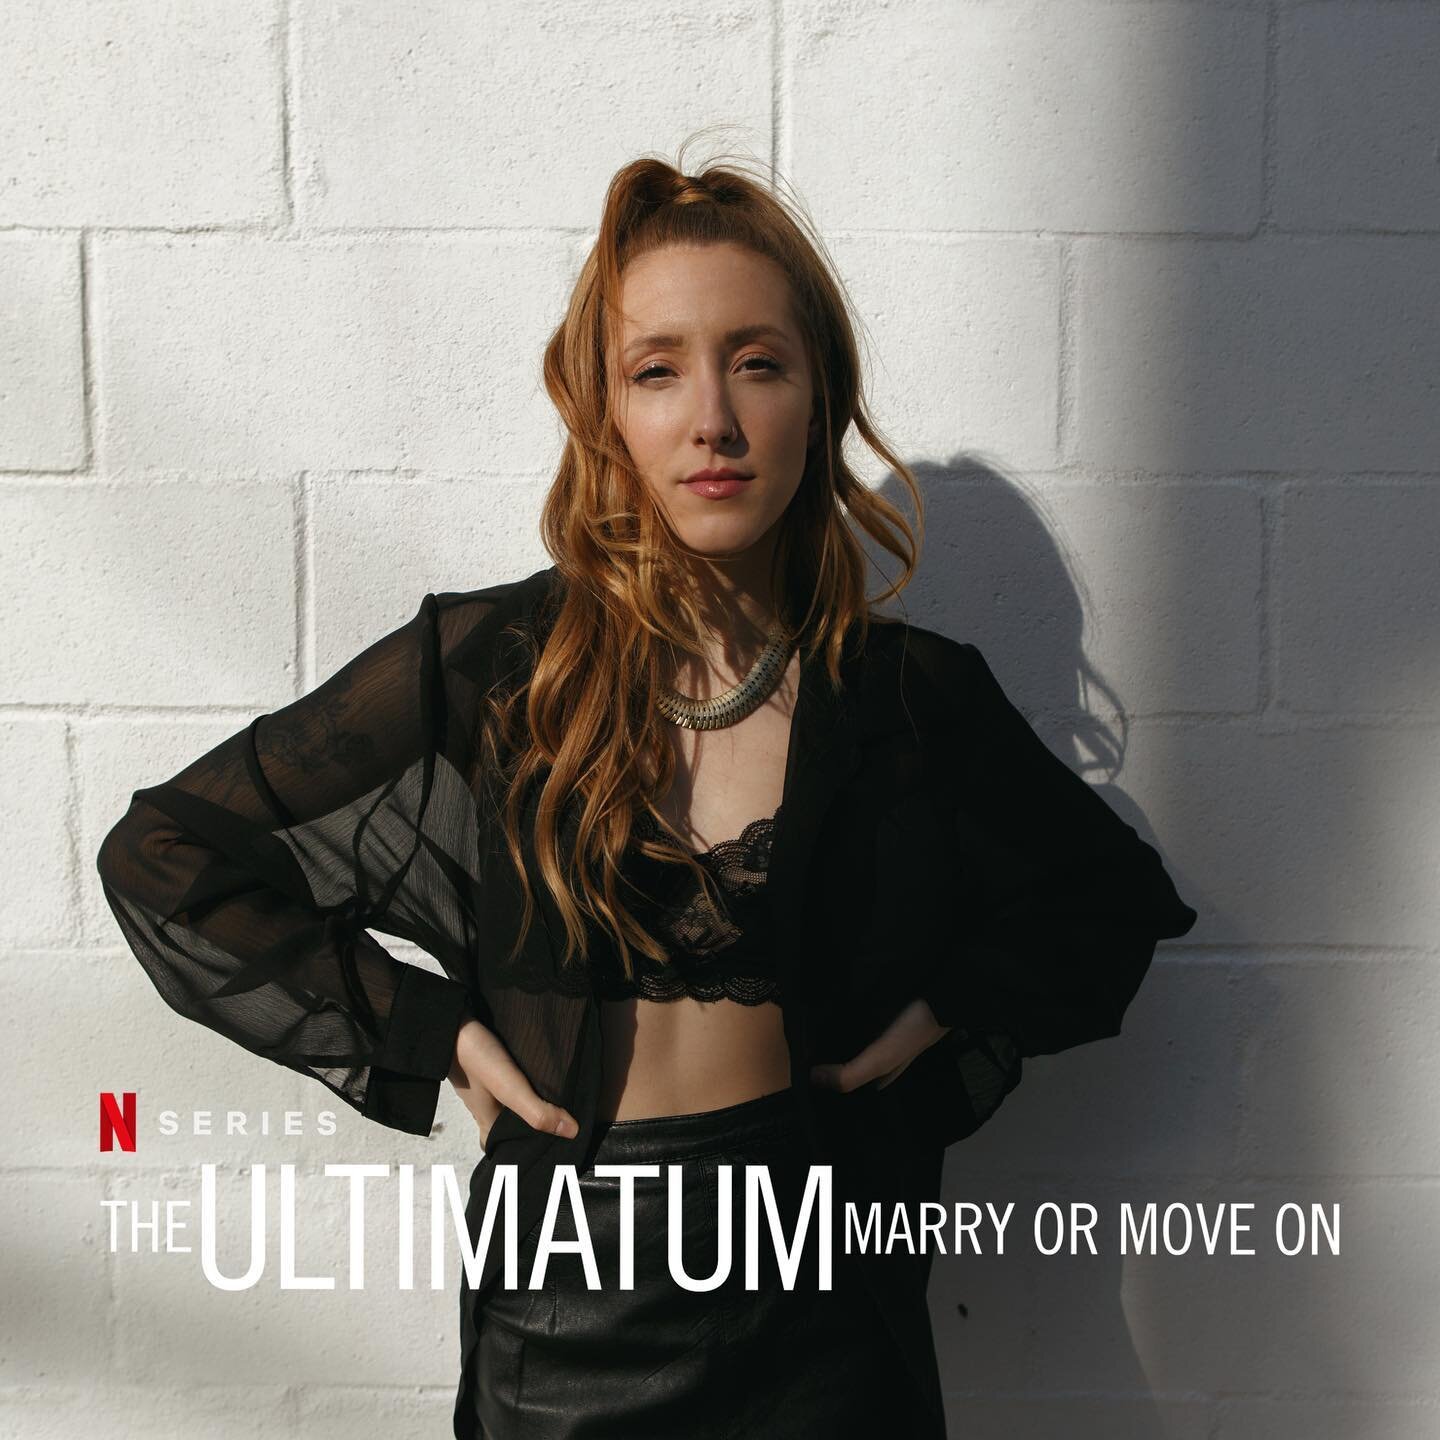 ICYMI: My song &ldquo;Small Talk&rdquo; opens Ep2 of @netflix&rsquo;s new show The Ultimatum: Marry or Move On! Go check it out!